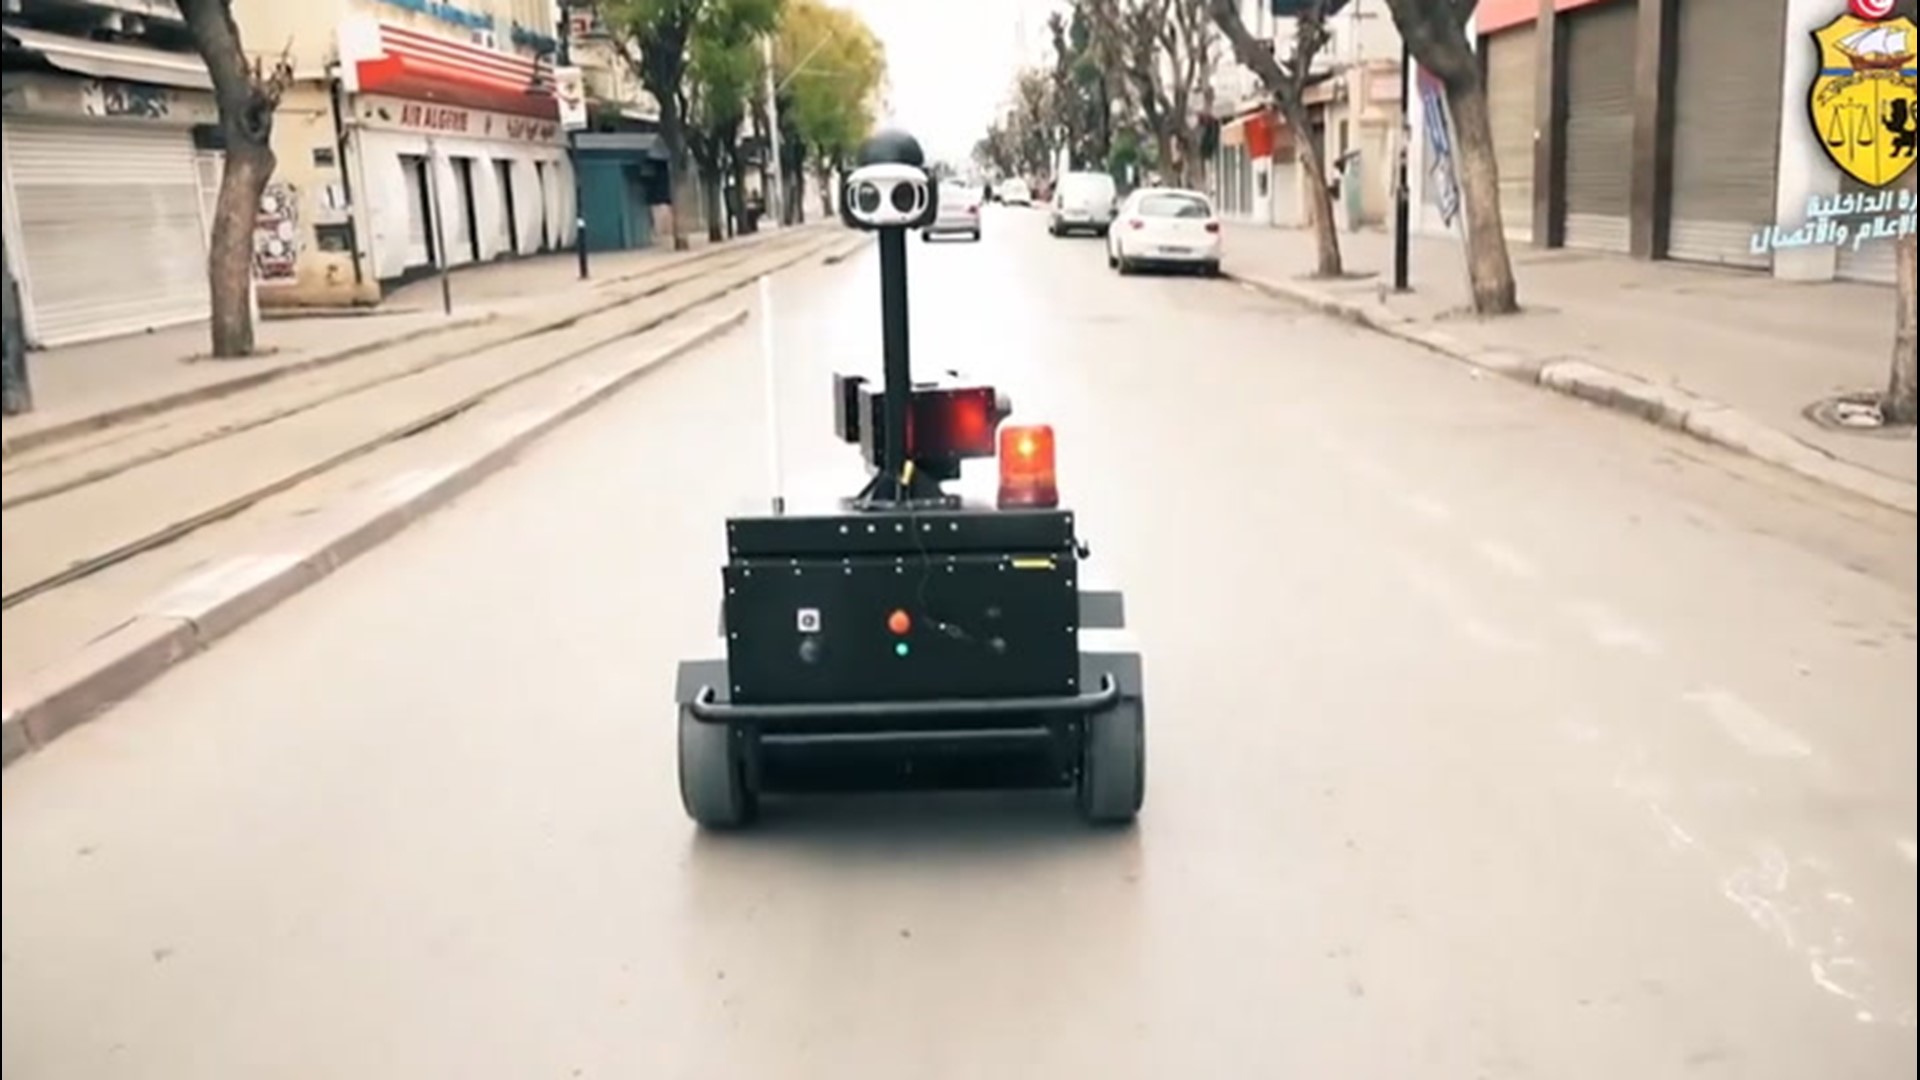 Authorities in Tunis, Tunisia. have deployed an unmanned vehicle to help enforce a lockdown on the area, due to COVID-19.